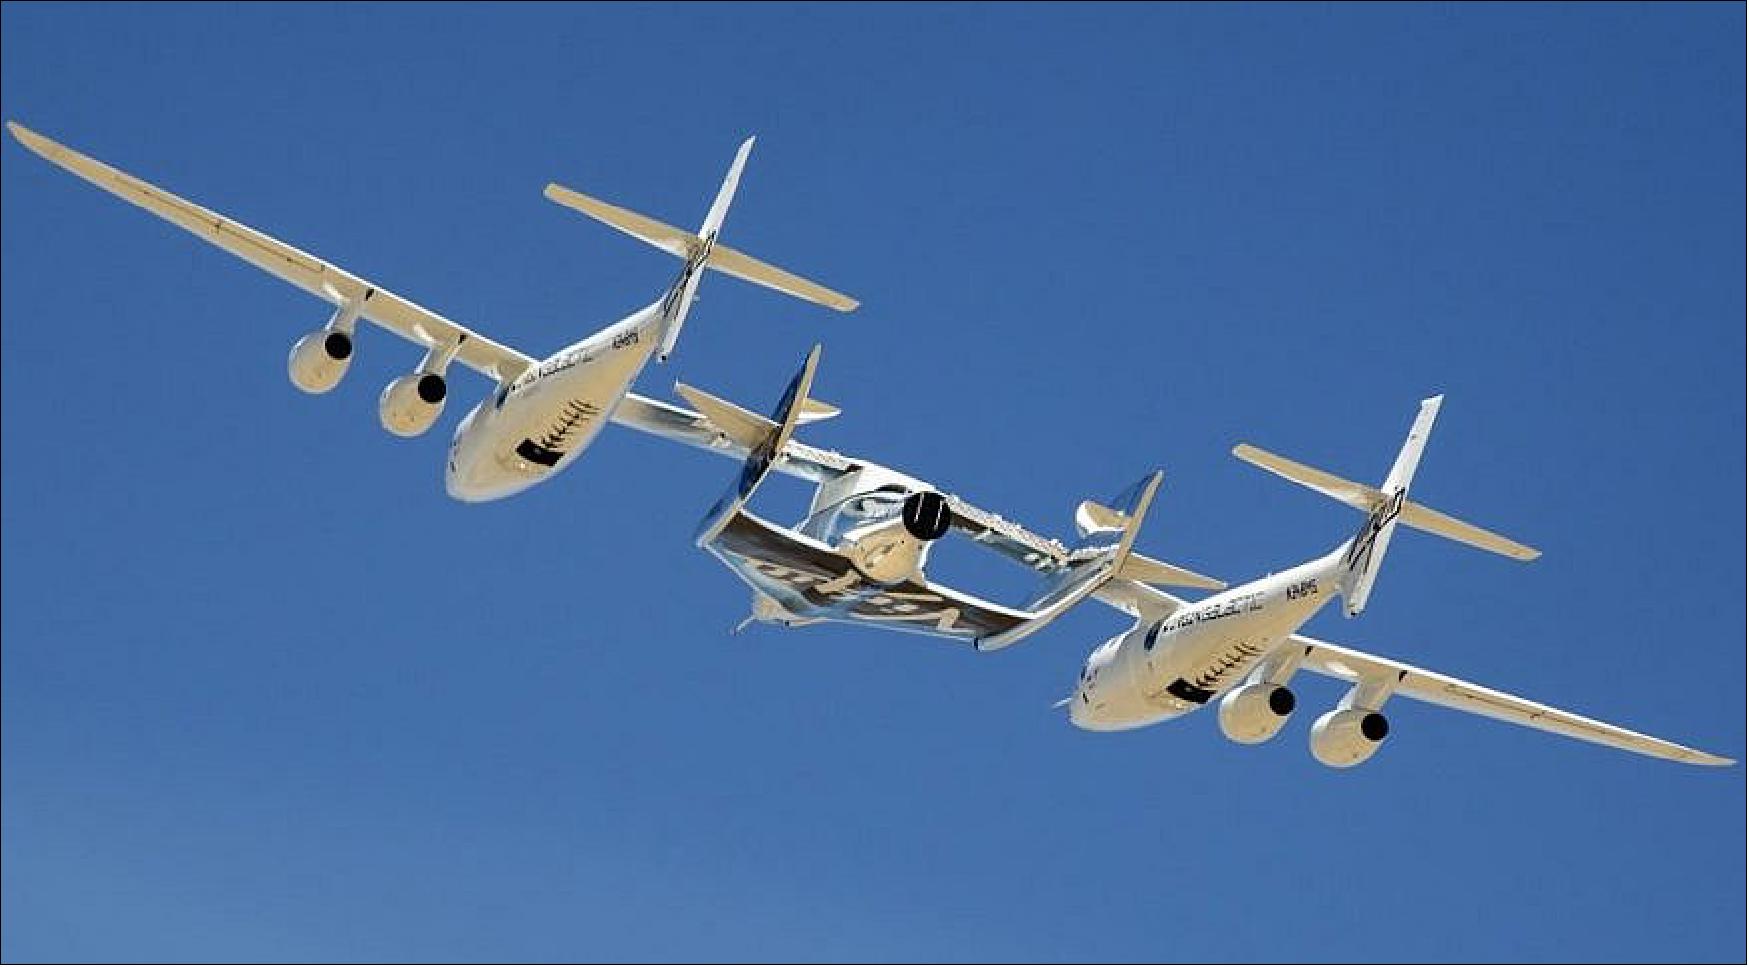 Figure 8: The company said that both its SpaceShipTwo suborbital vehicle and WhiteKnightTwo carrier aircraft are in an extended maintenance period that will push back the beginning of regular commercial flights to late 2022 (image credit: Virgin Galactic)